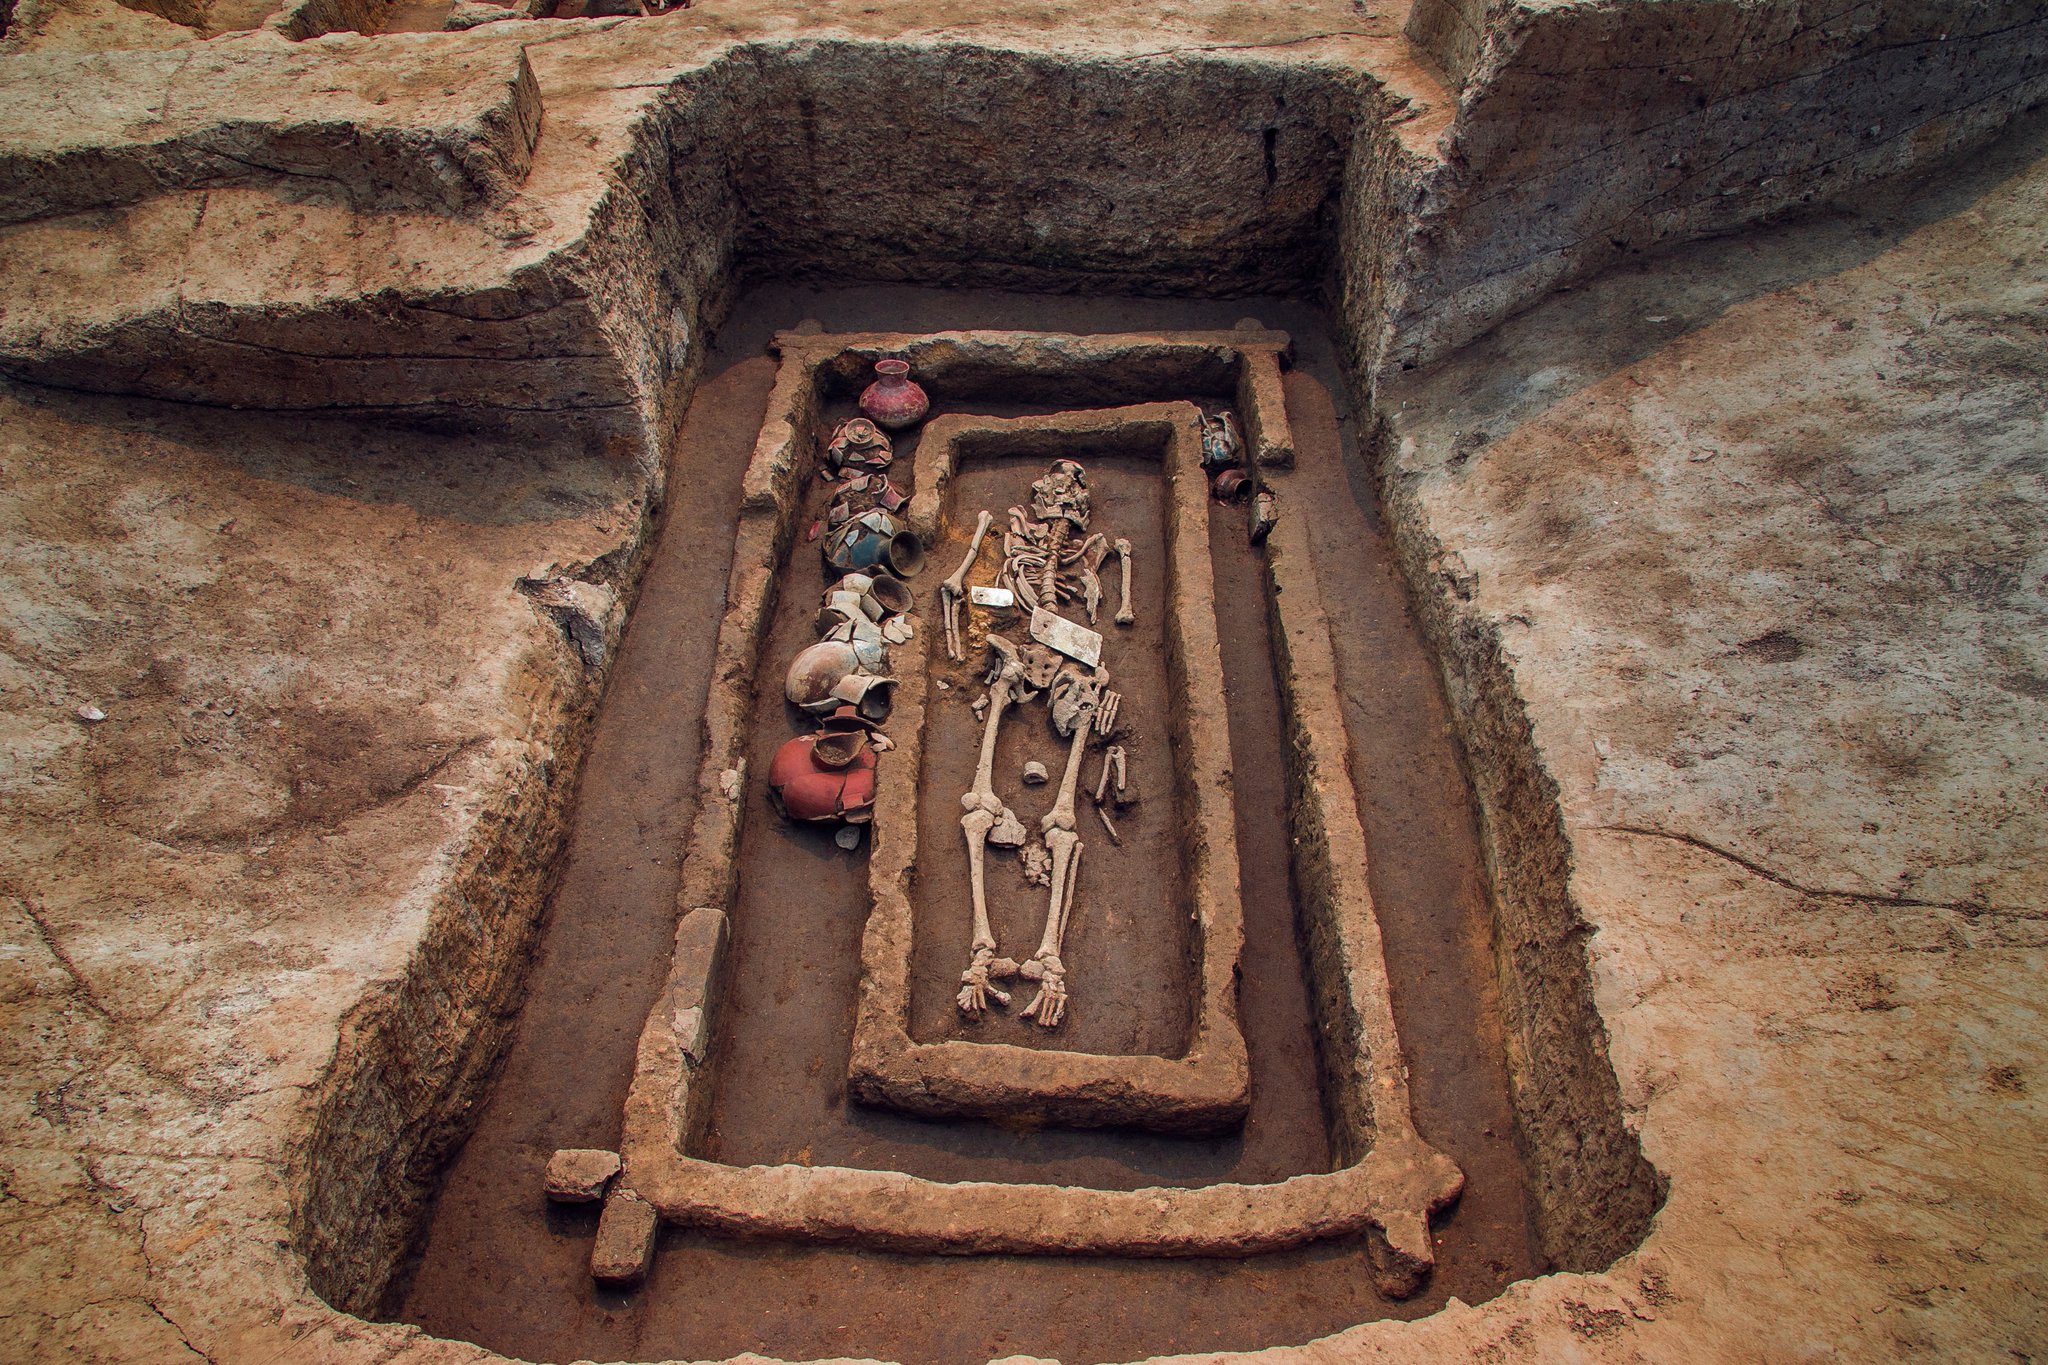 Archaeologists Unearth ‘Grave Of Giants’ In China